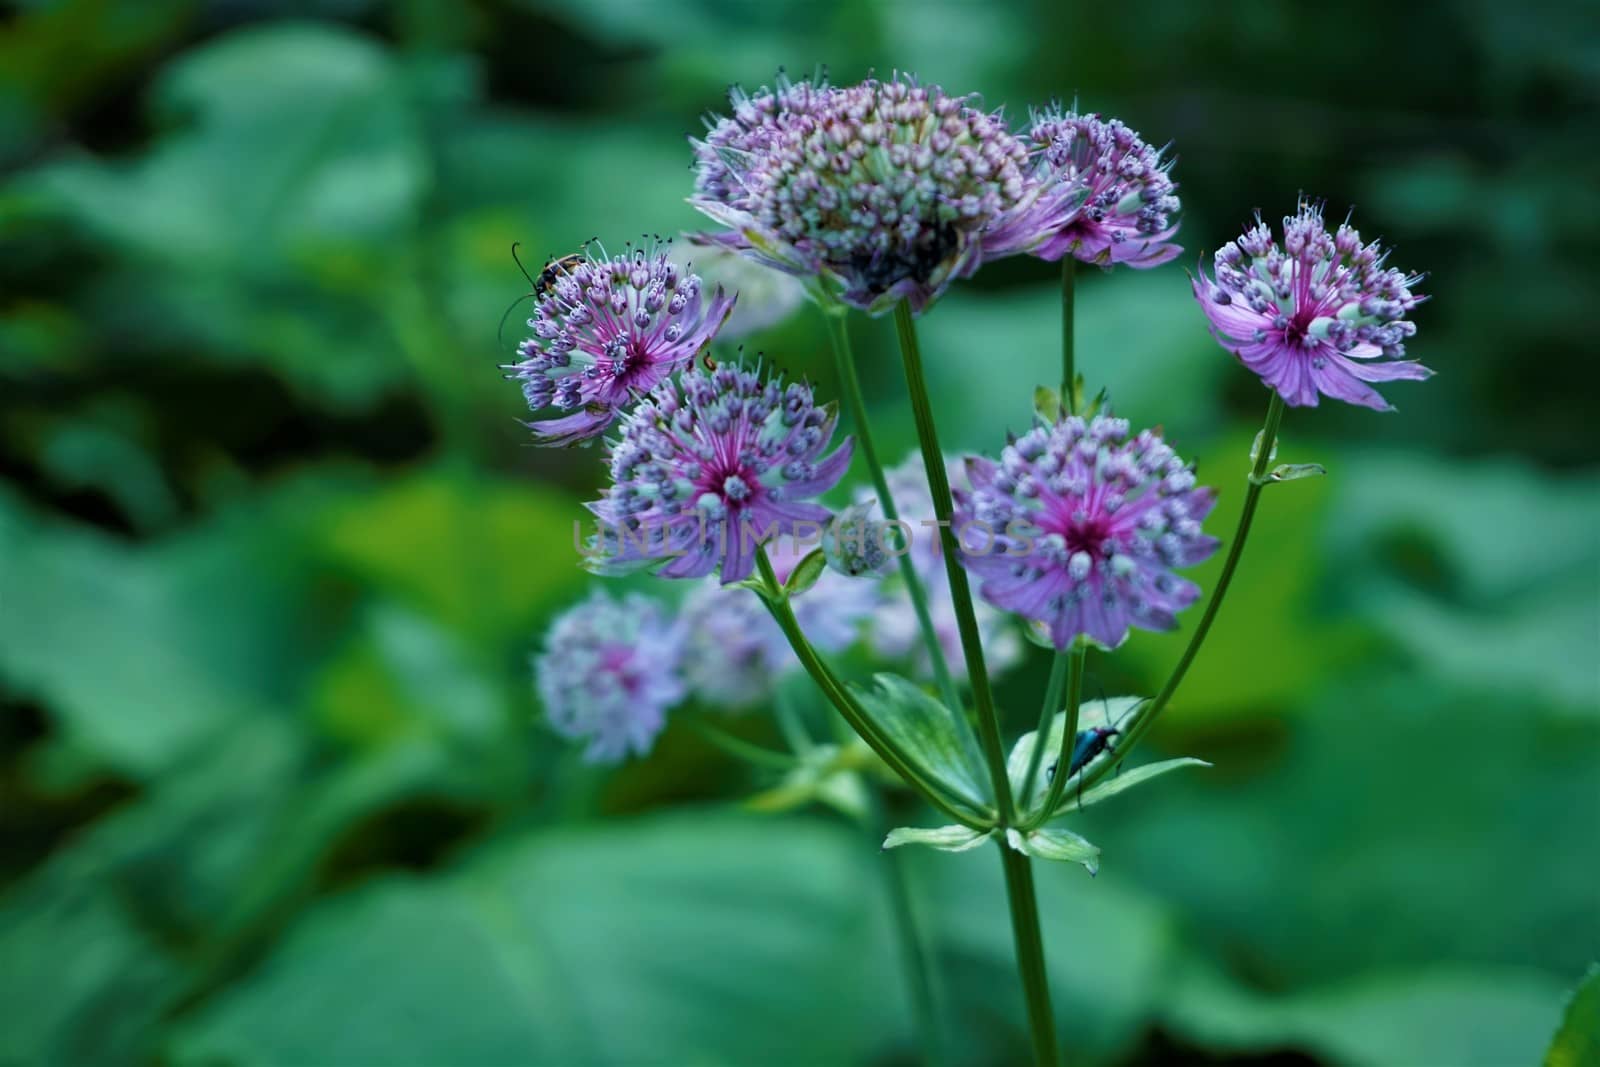 Astrantia major blossoms with bugs in Slovenian forest